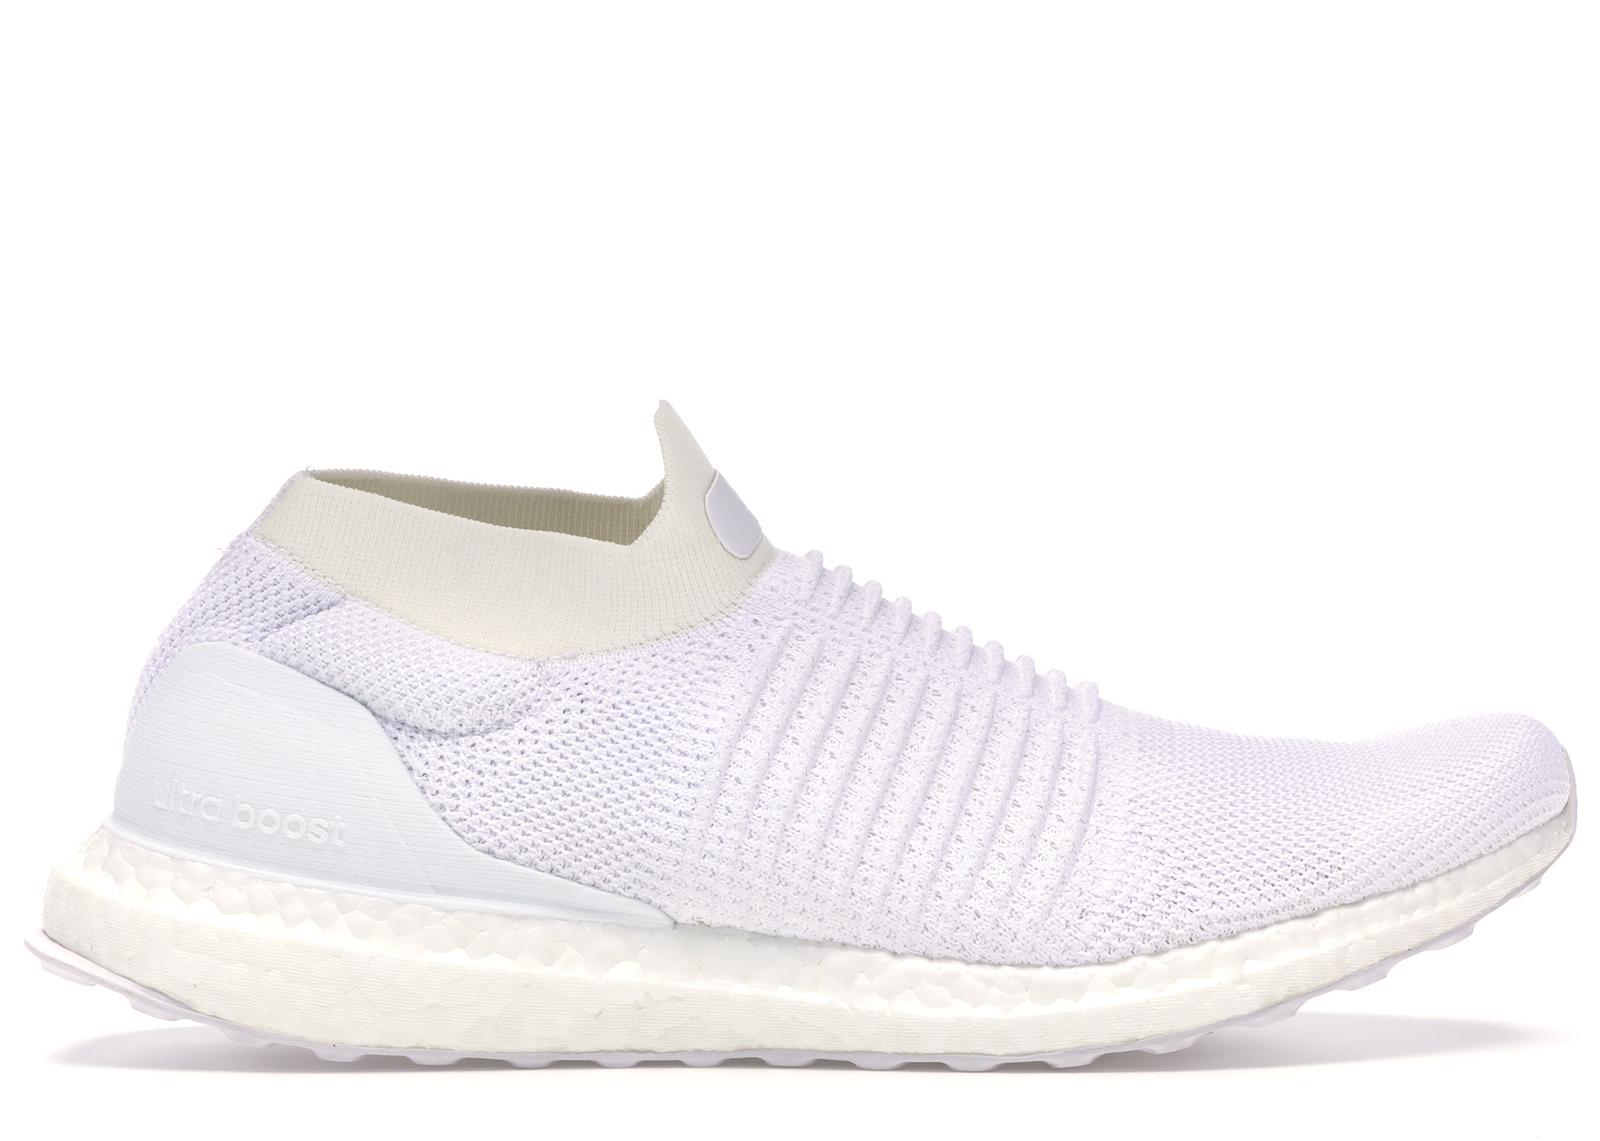 adidas Ultra Boost Laceless Mid Triple White for Men - Lyst